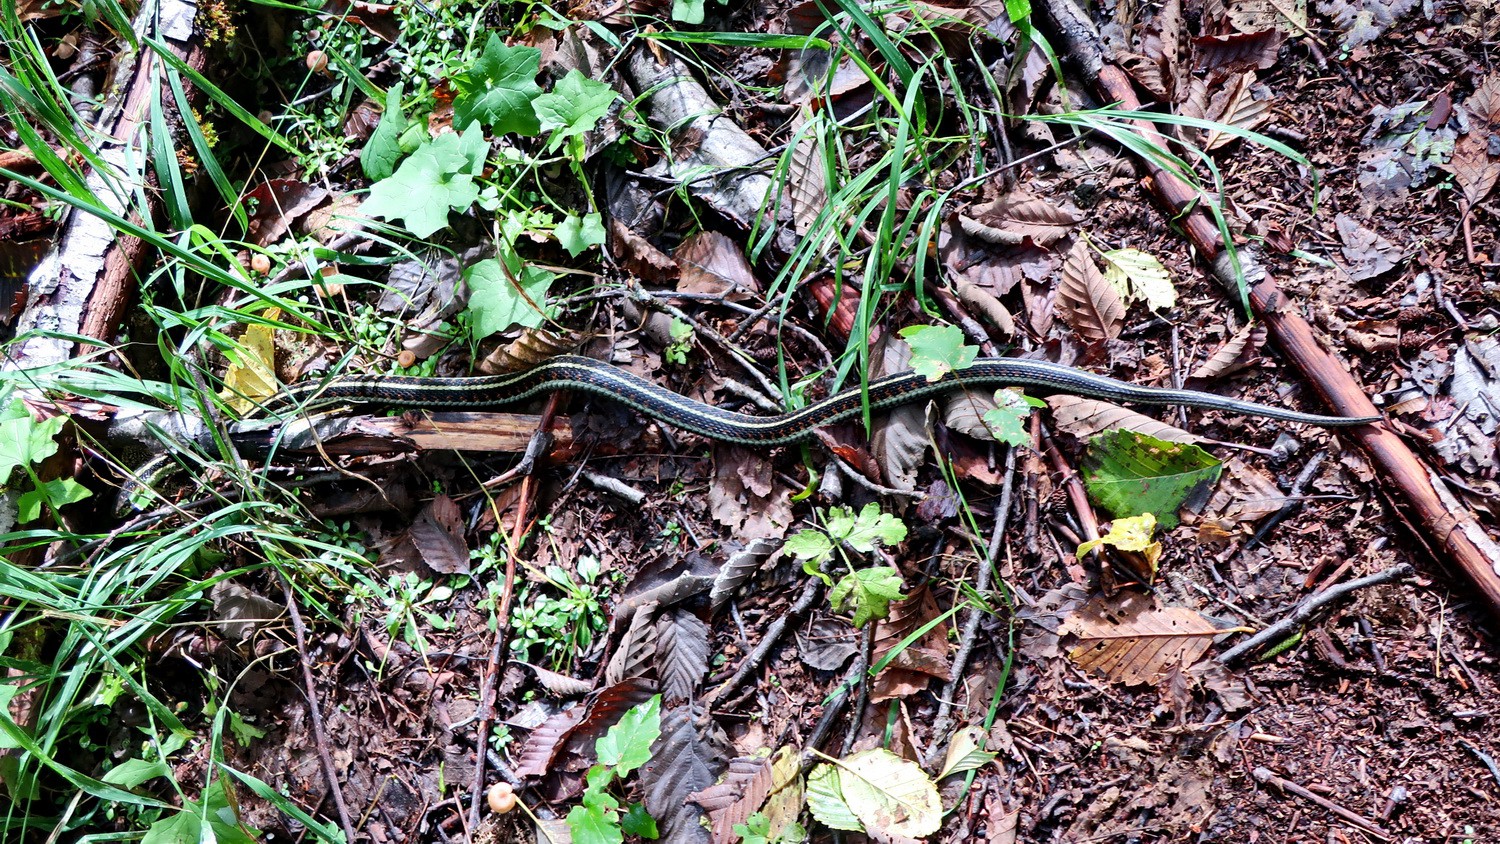 Harmless Garden Snake on the way to Lava Butte